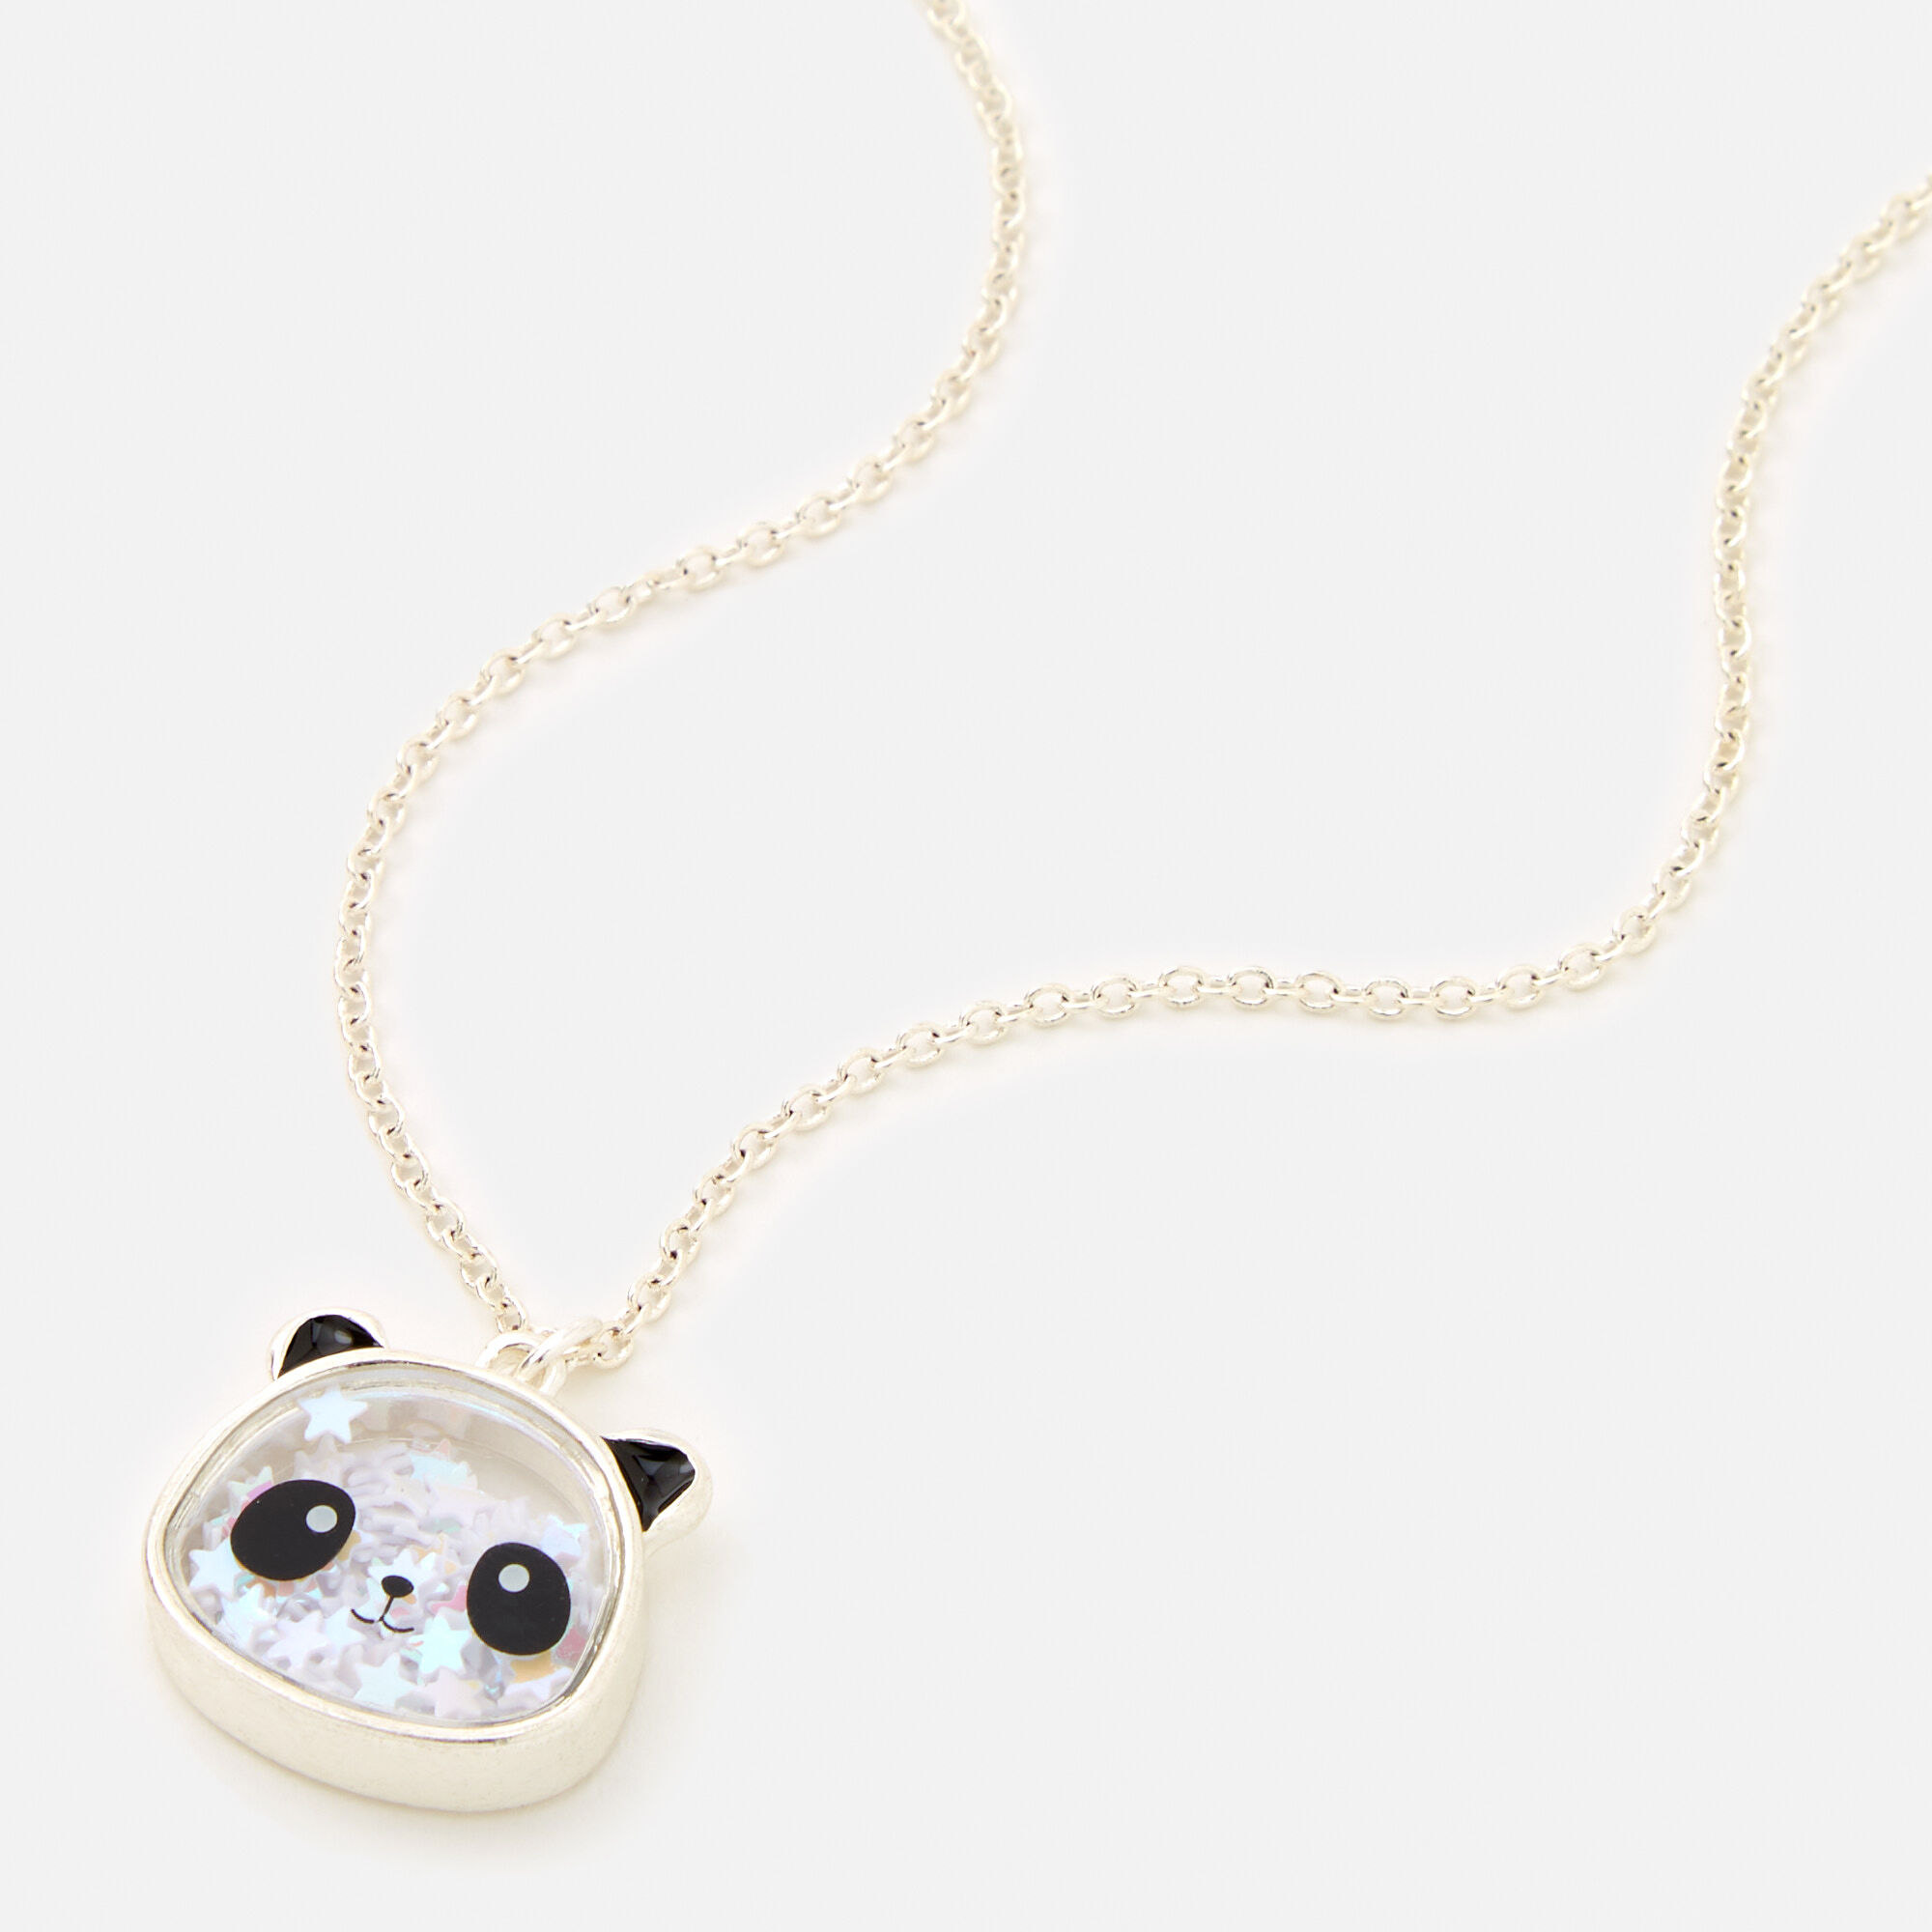 View Claires Tone 16 Panda Shaker Novelty Pendant Necklace Silver information